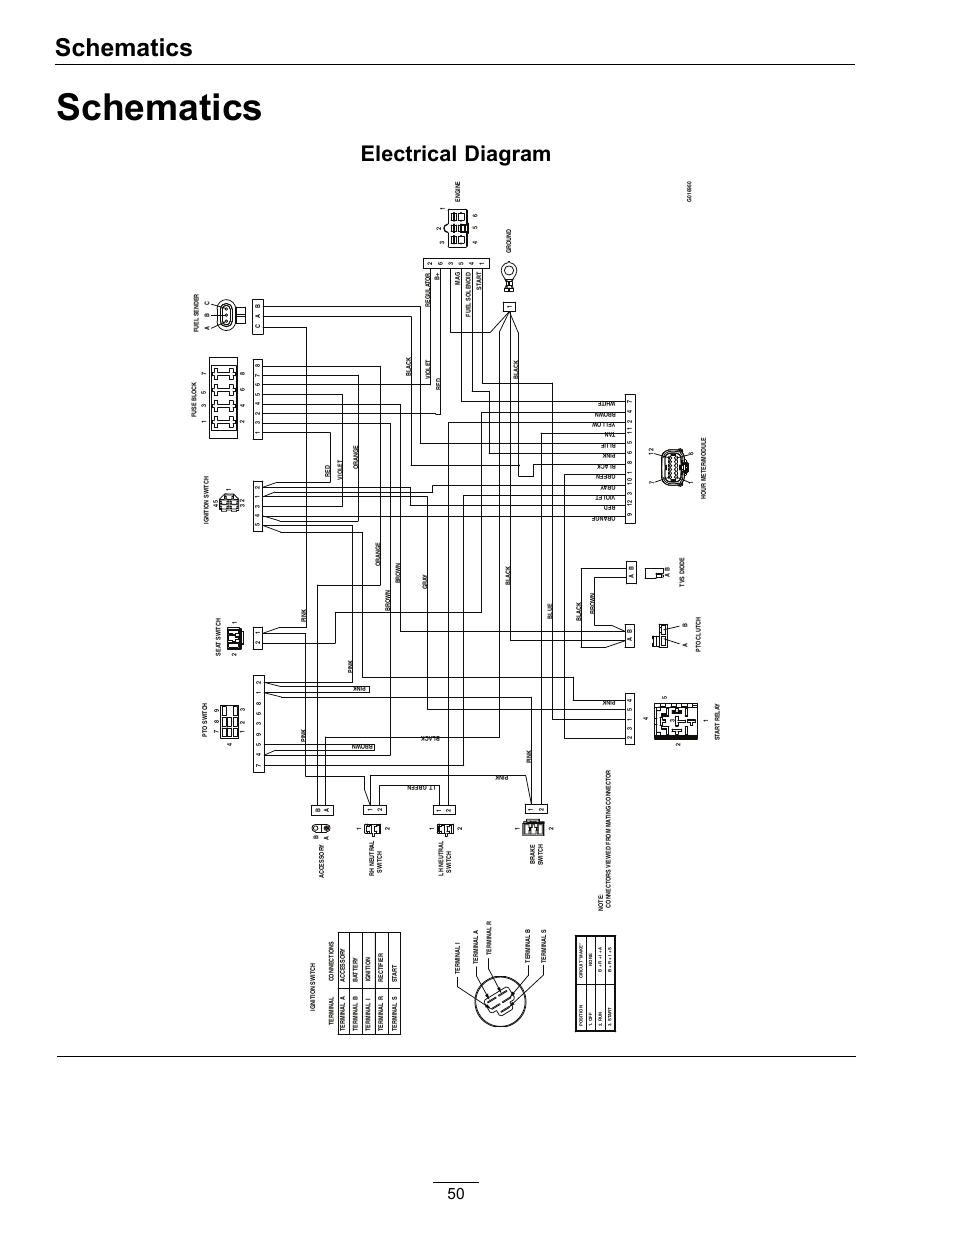 wiring diagram for ih656